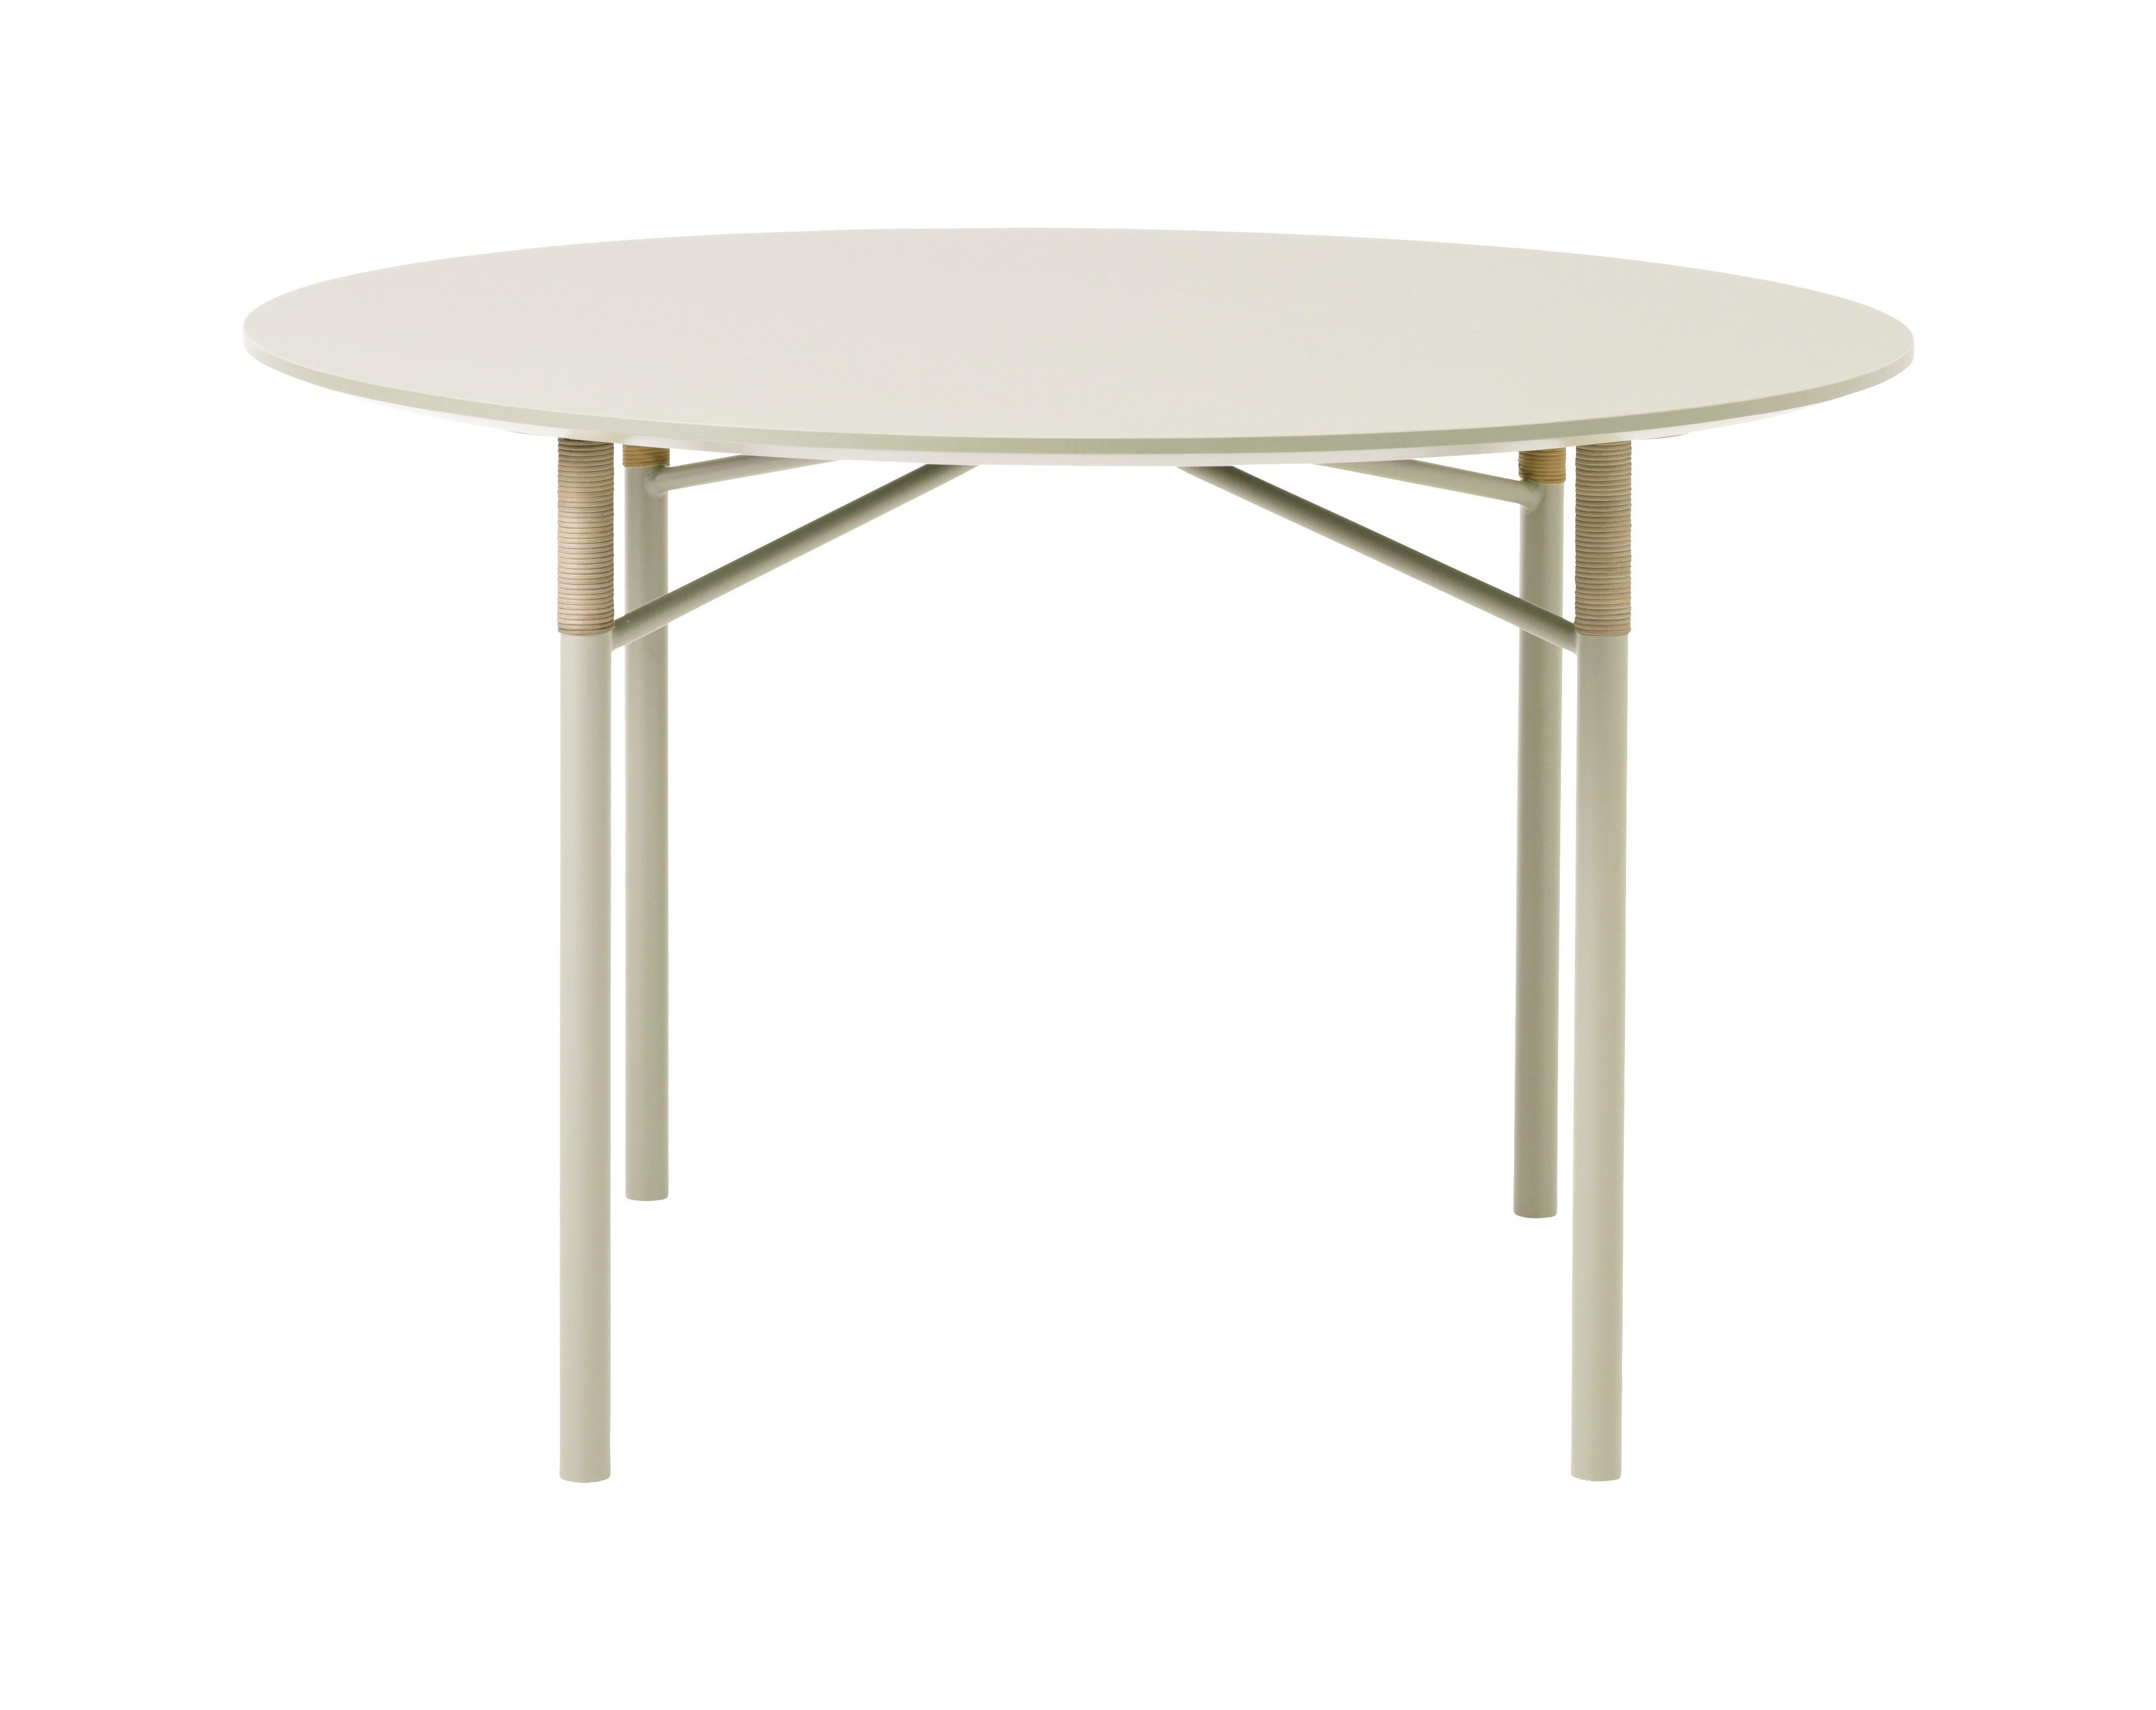 For Sale: Pink (Mushroom) Affinity Round Dining Table, by Halskov & Dalsgaard from Warm Nordic 2